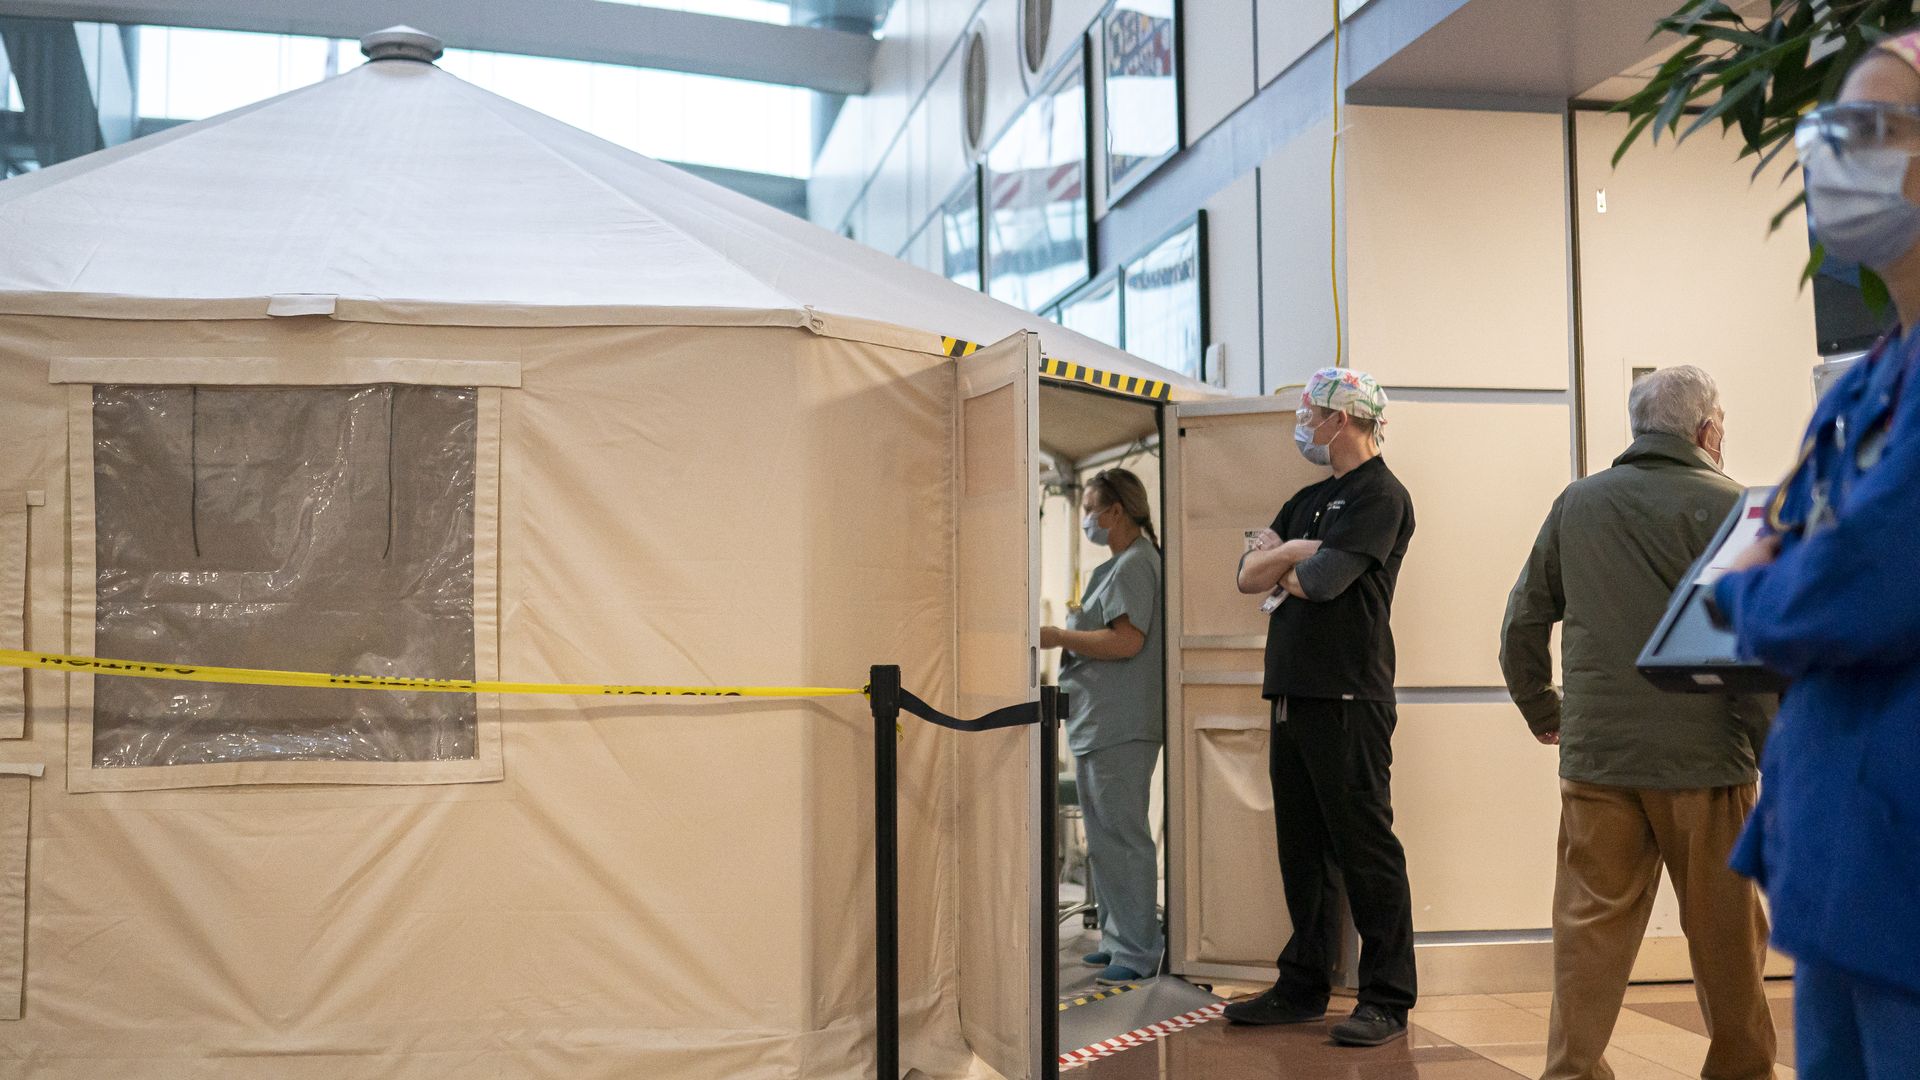 A healthcare worker at the Portland Veterans Affairs Medical Center waits outside a surge tent to receive his COVID-19 vaccination on December 16, 2020 in Portland, Oregon. 